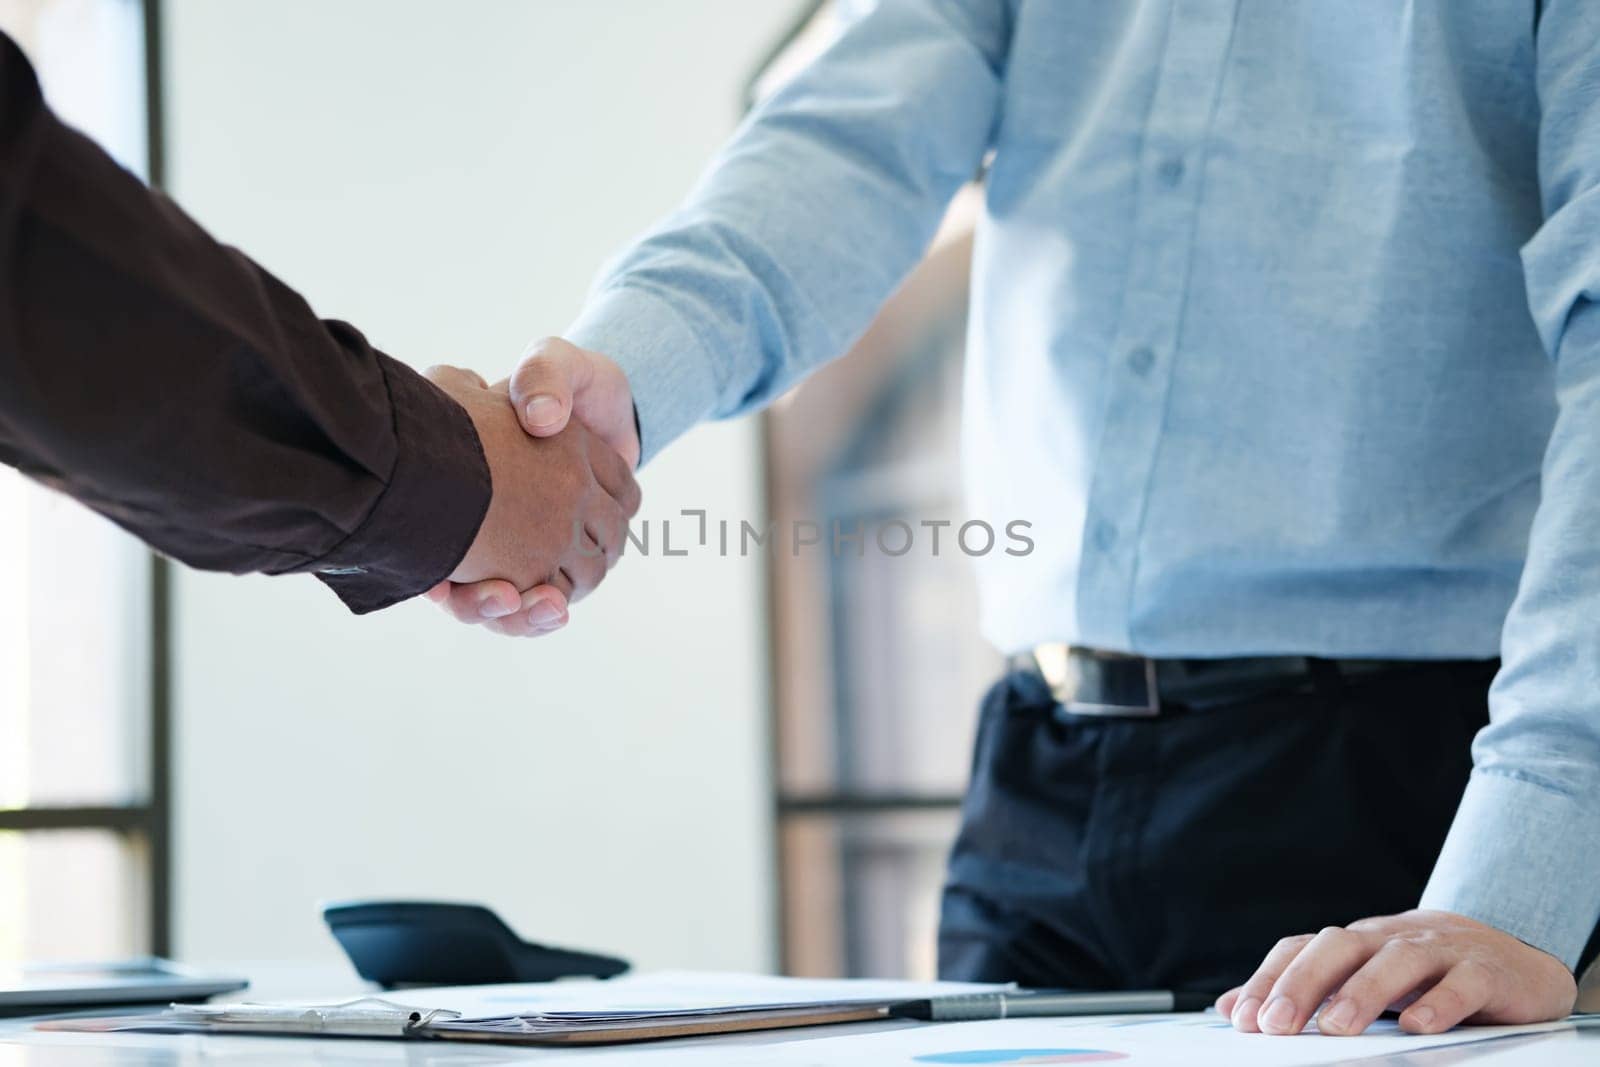 The business deal was successful and businessmen shake hands and congratulate each other.